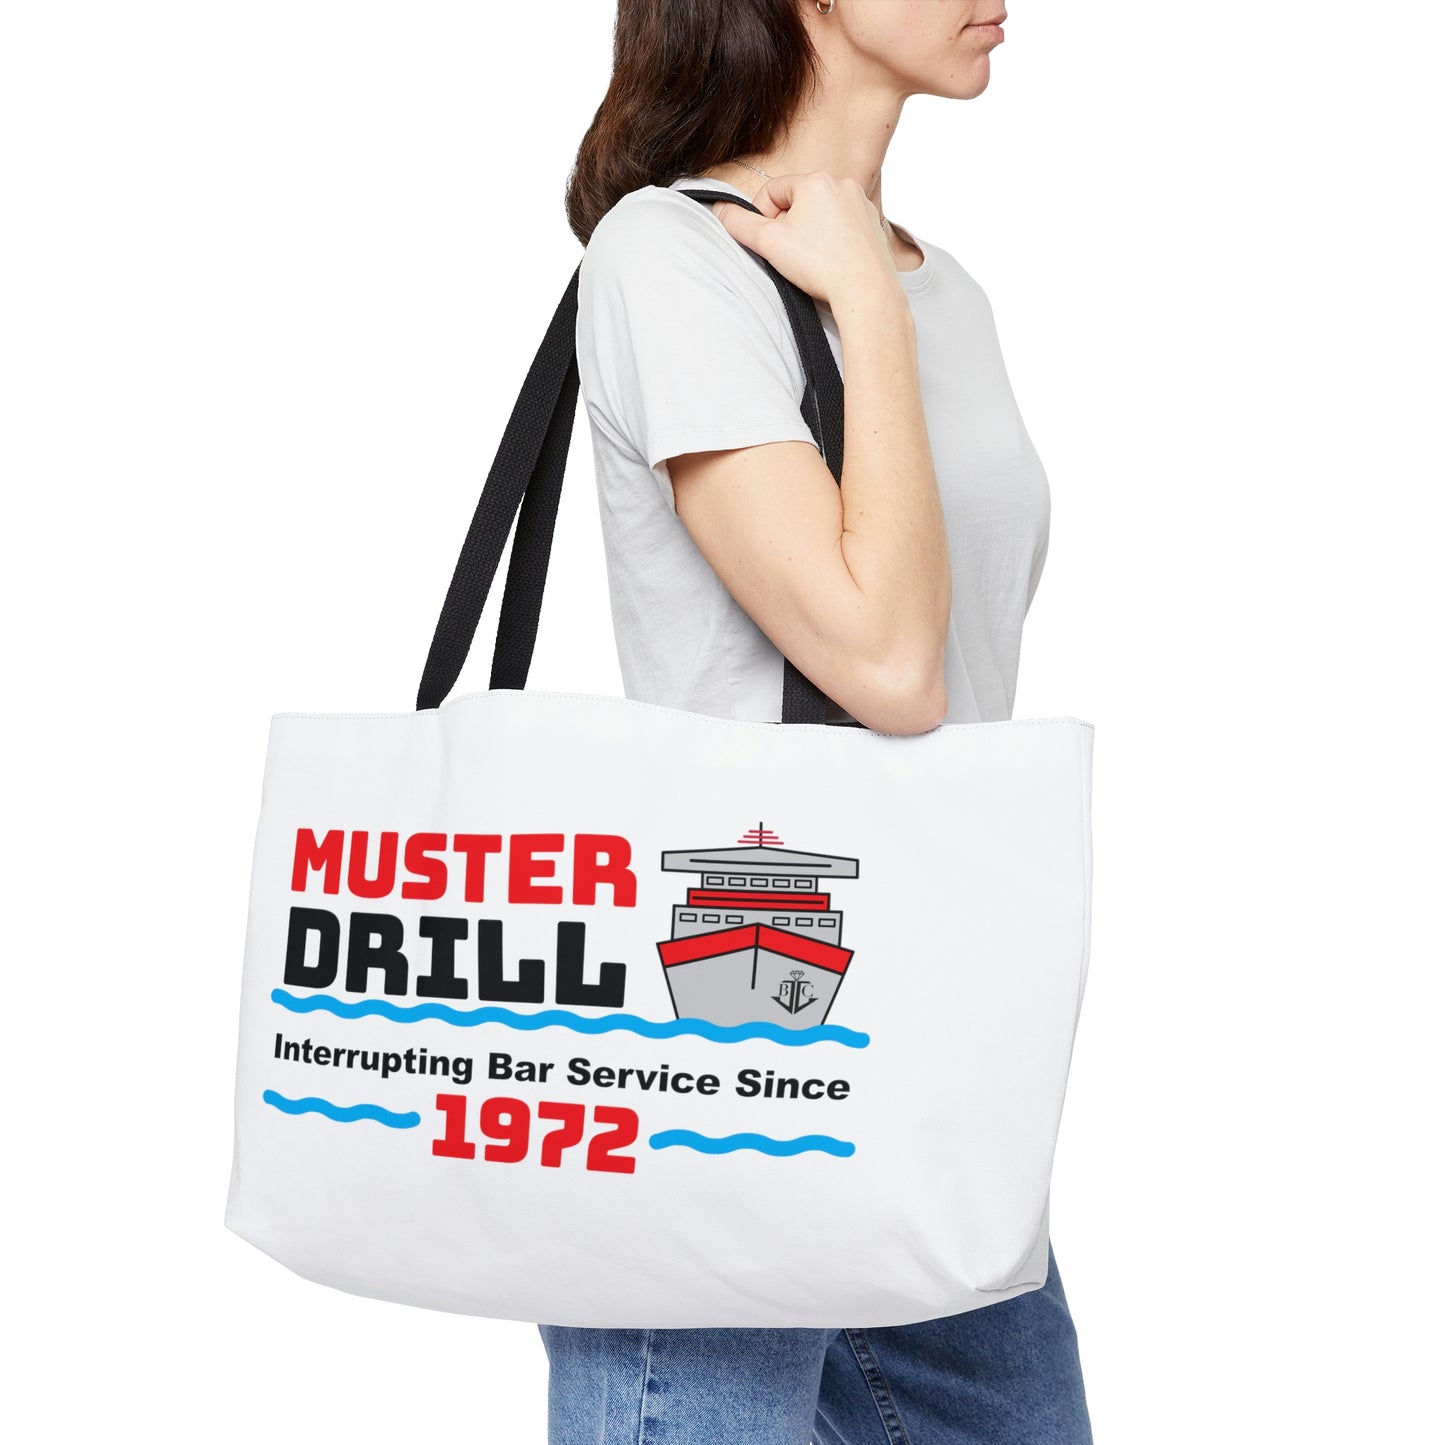 Muster Drill Interrupting Bar Service Since 1972-Weekender Tote Bag